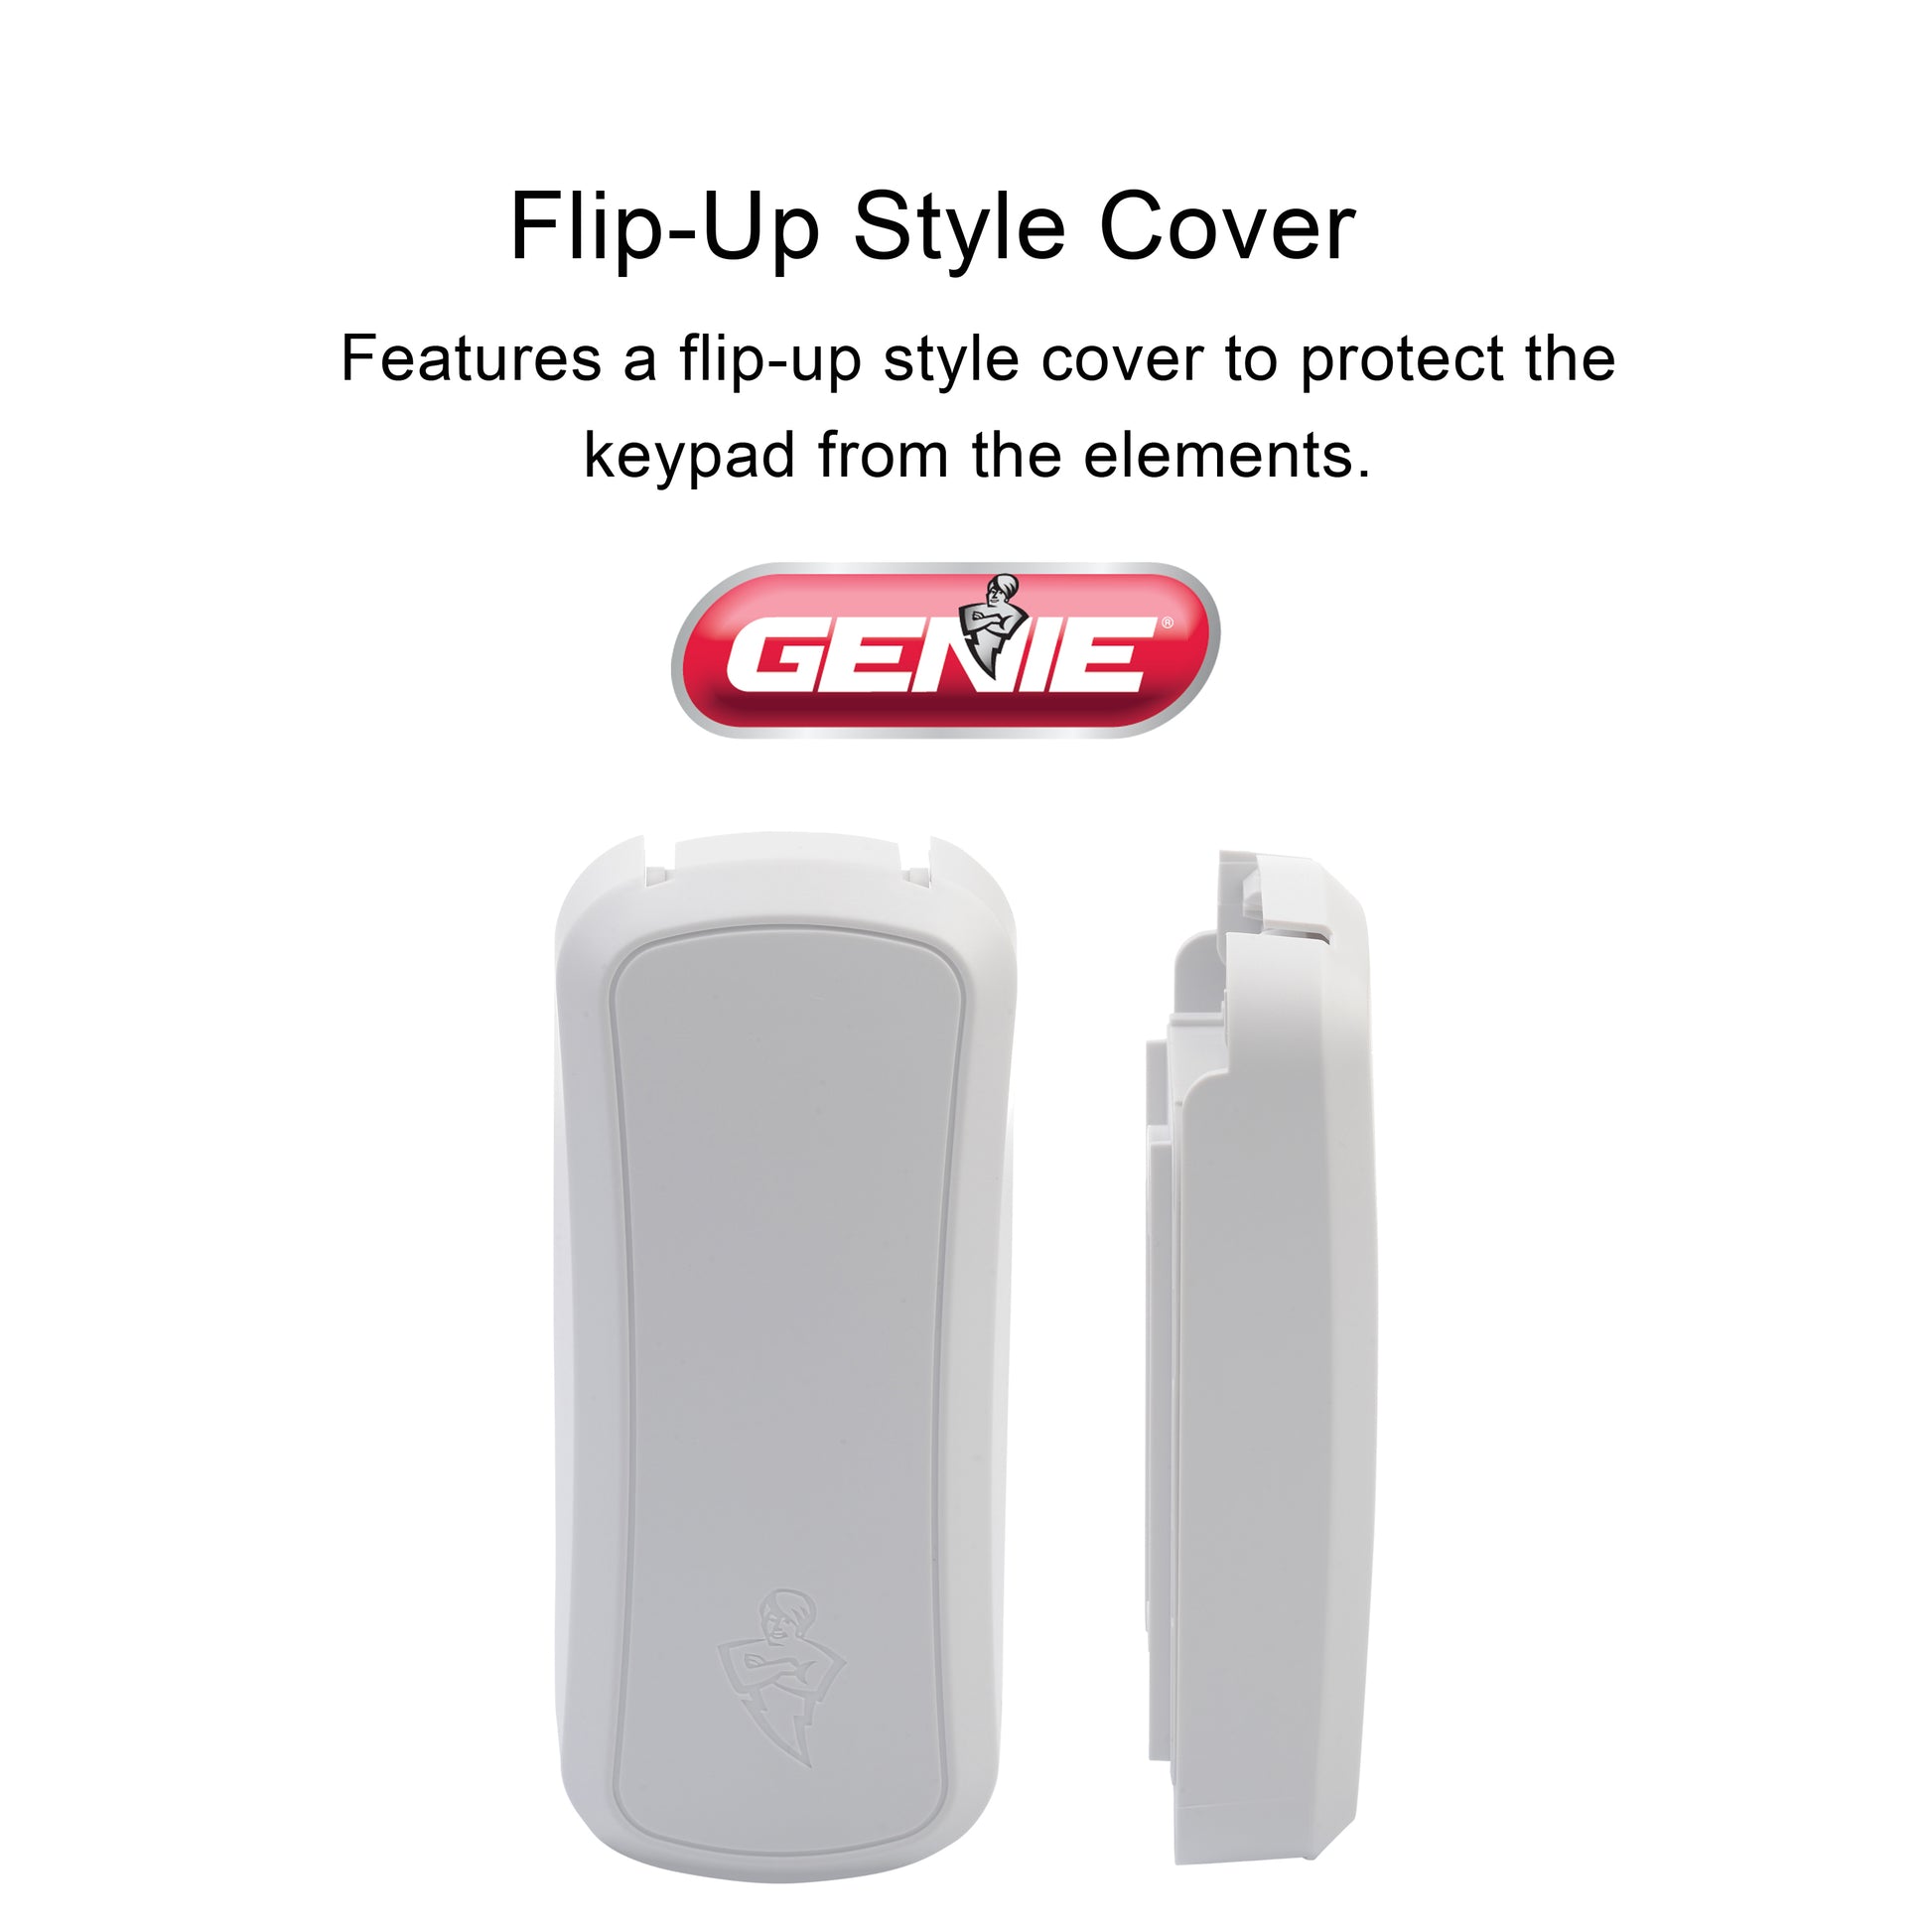 Genie keyless entry pad has a flip up cover 